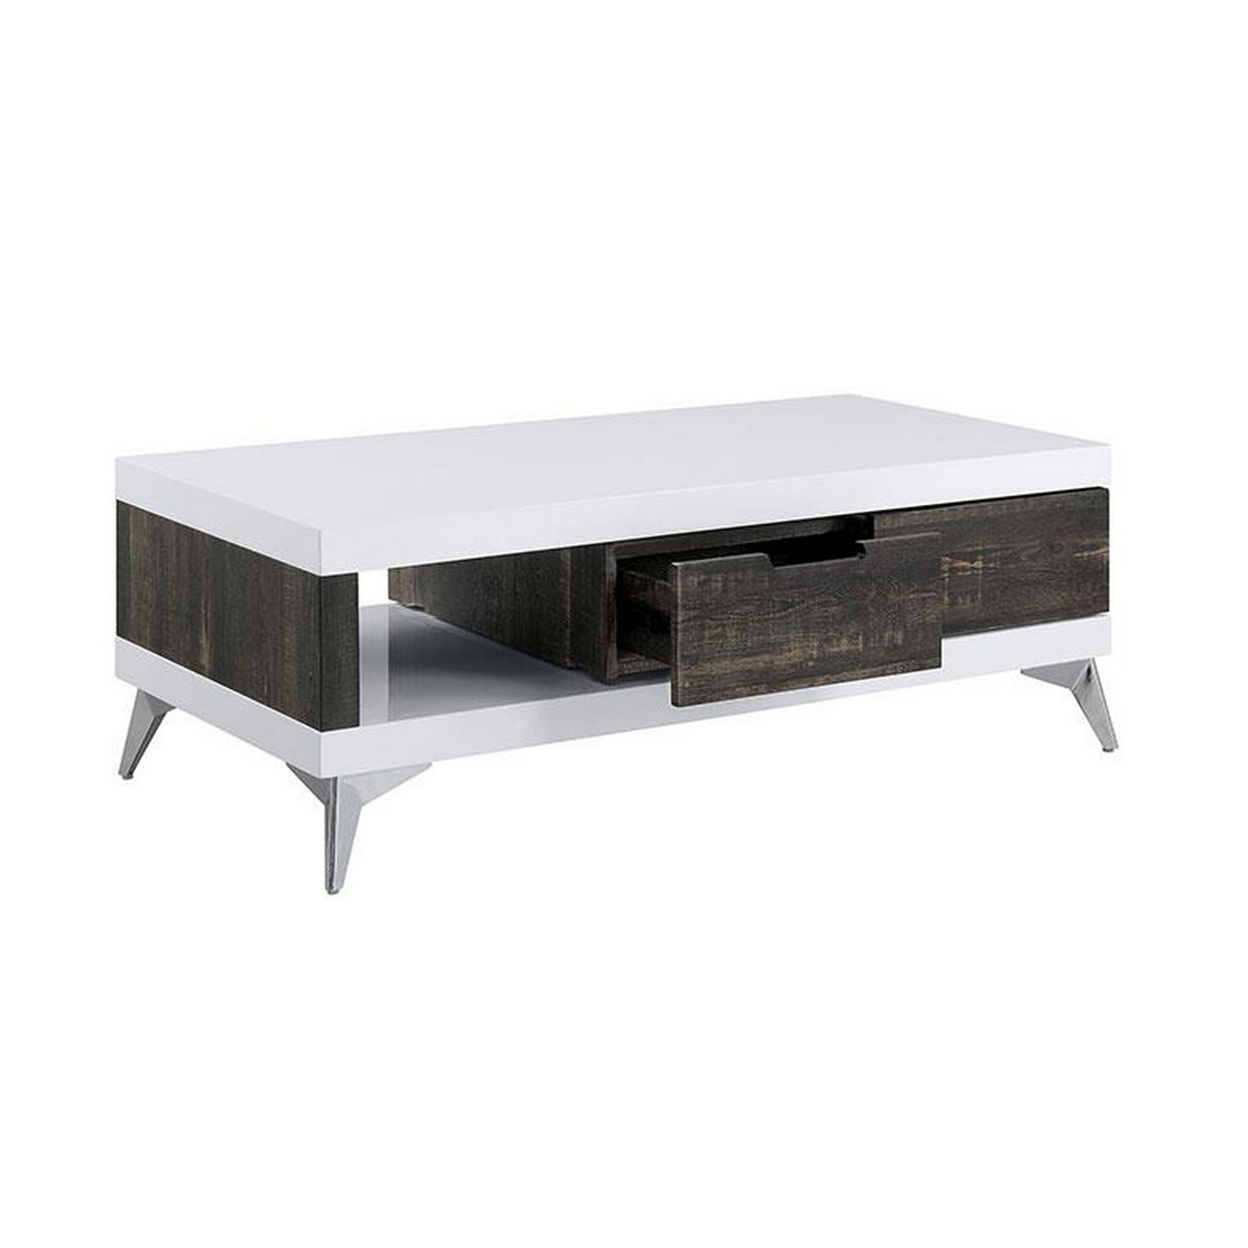 Two Tone Coffee Table With Open Shelf, White And Brown- Saltoro Sherpi